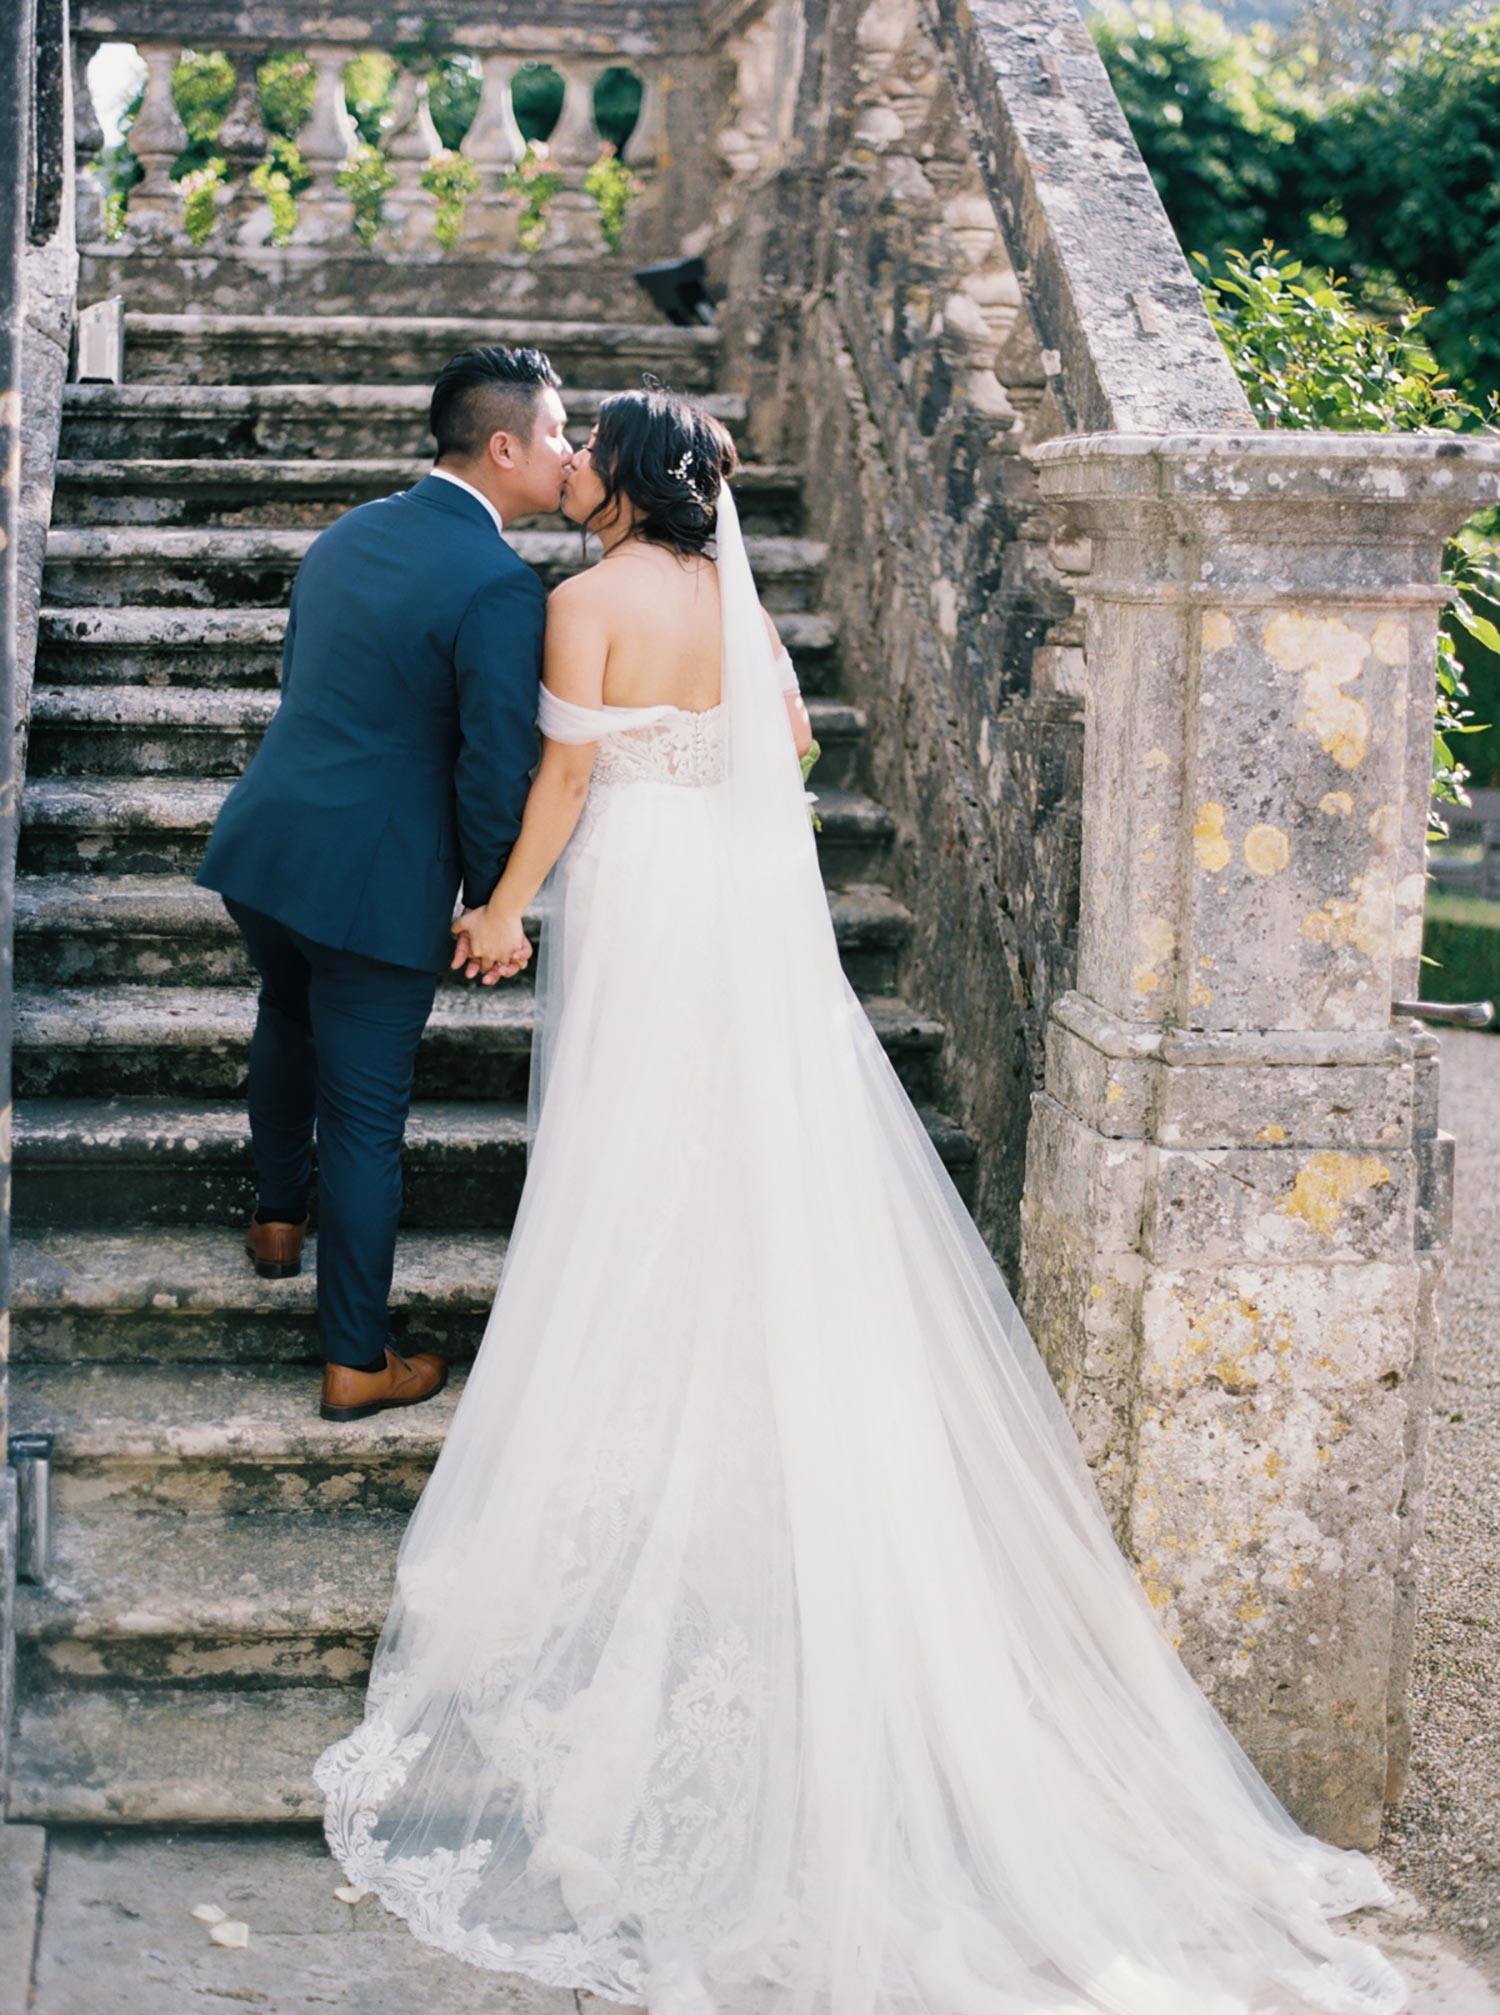 historic Italian villa with old stone staircase and bride in an off-the-shoulder embroidered tulle wedding dress kissing groom in a navy groom suit